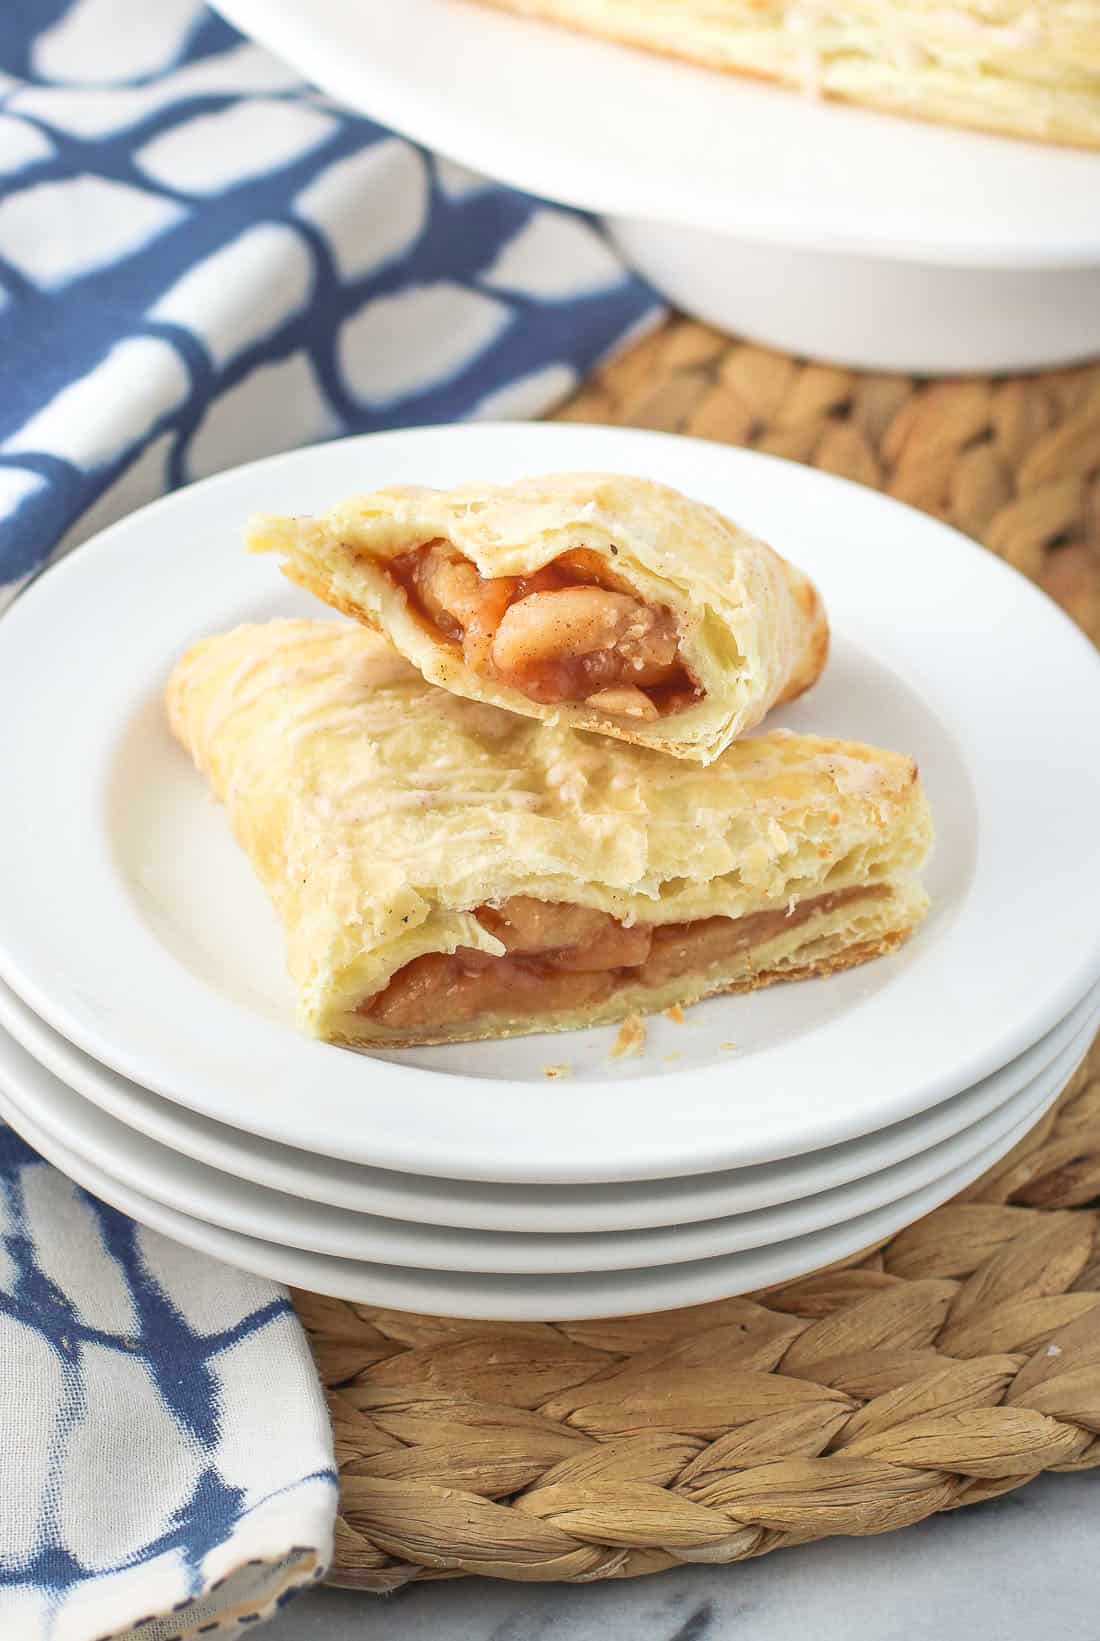 An apple turnover cut in half on a stack of dessert plates.